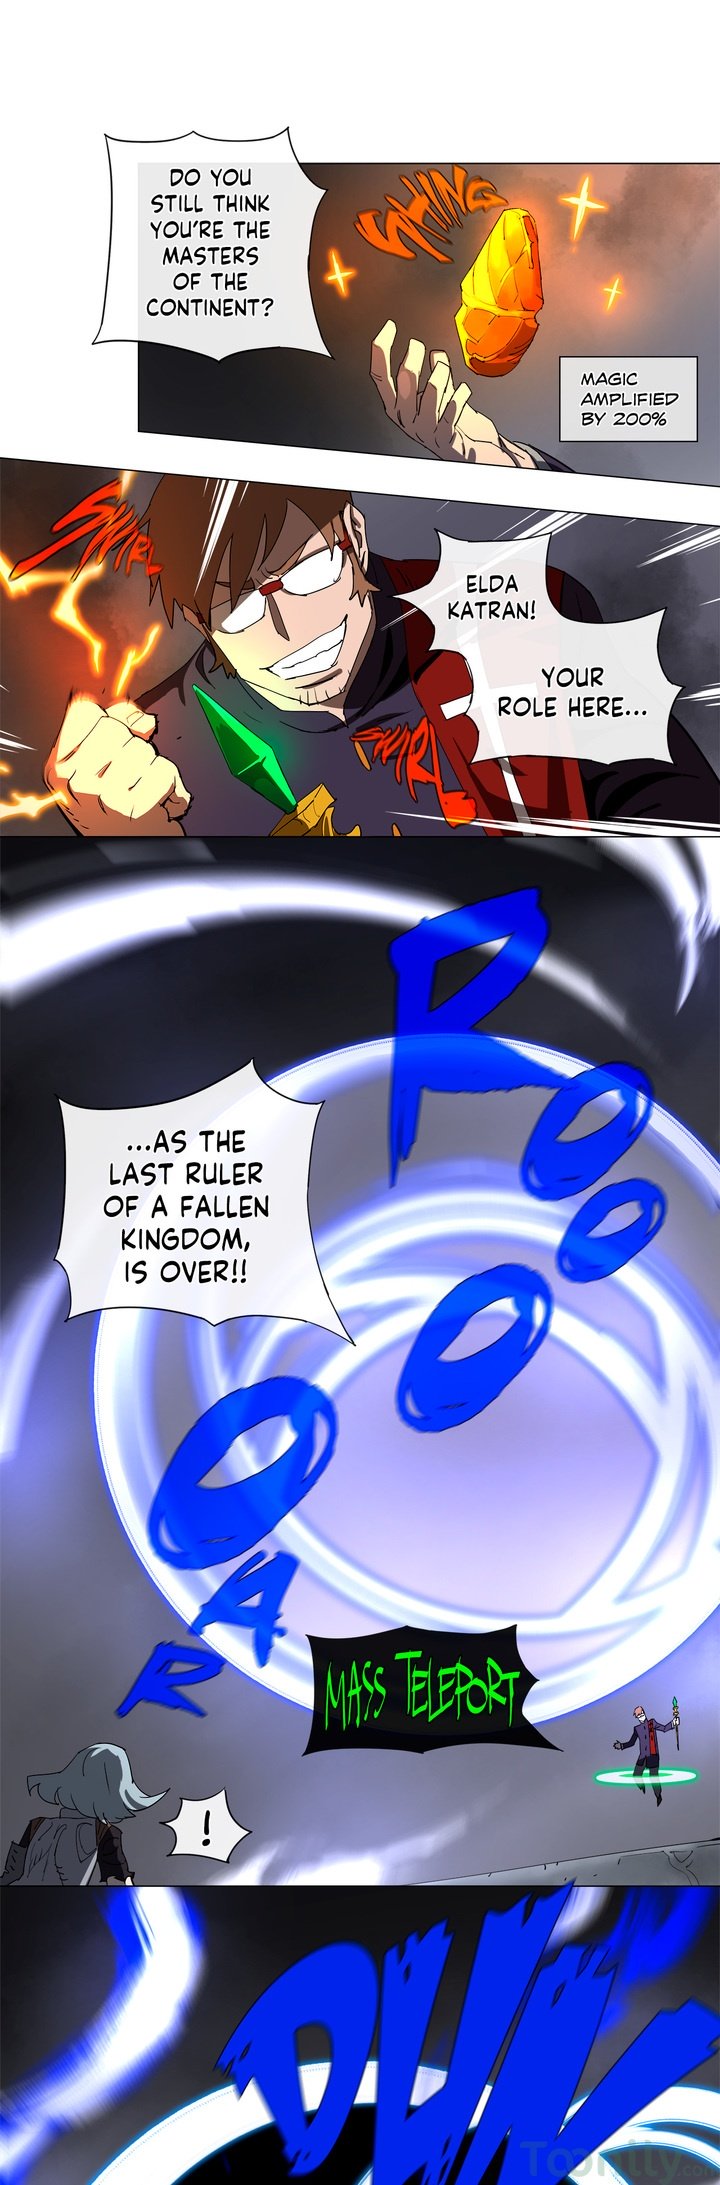 4 Cut Hero chapter 132 page 10